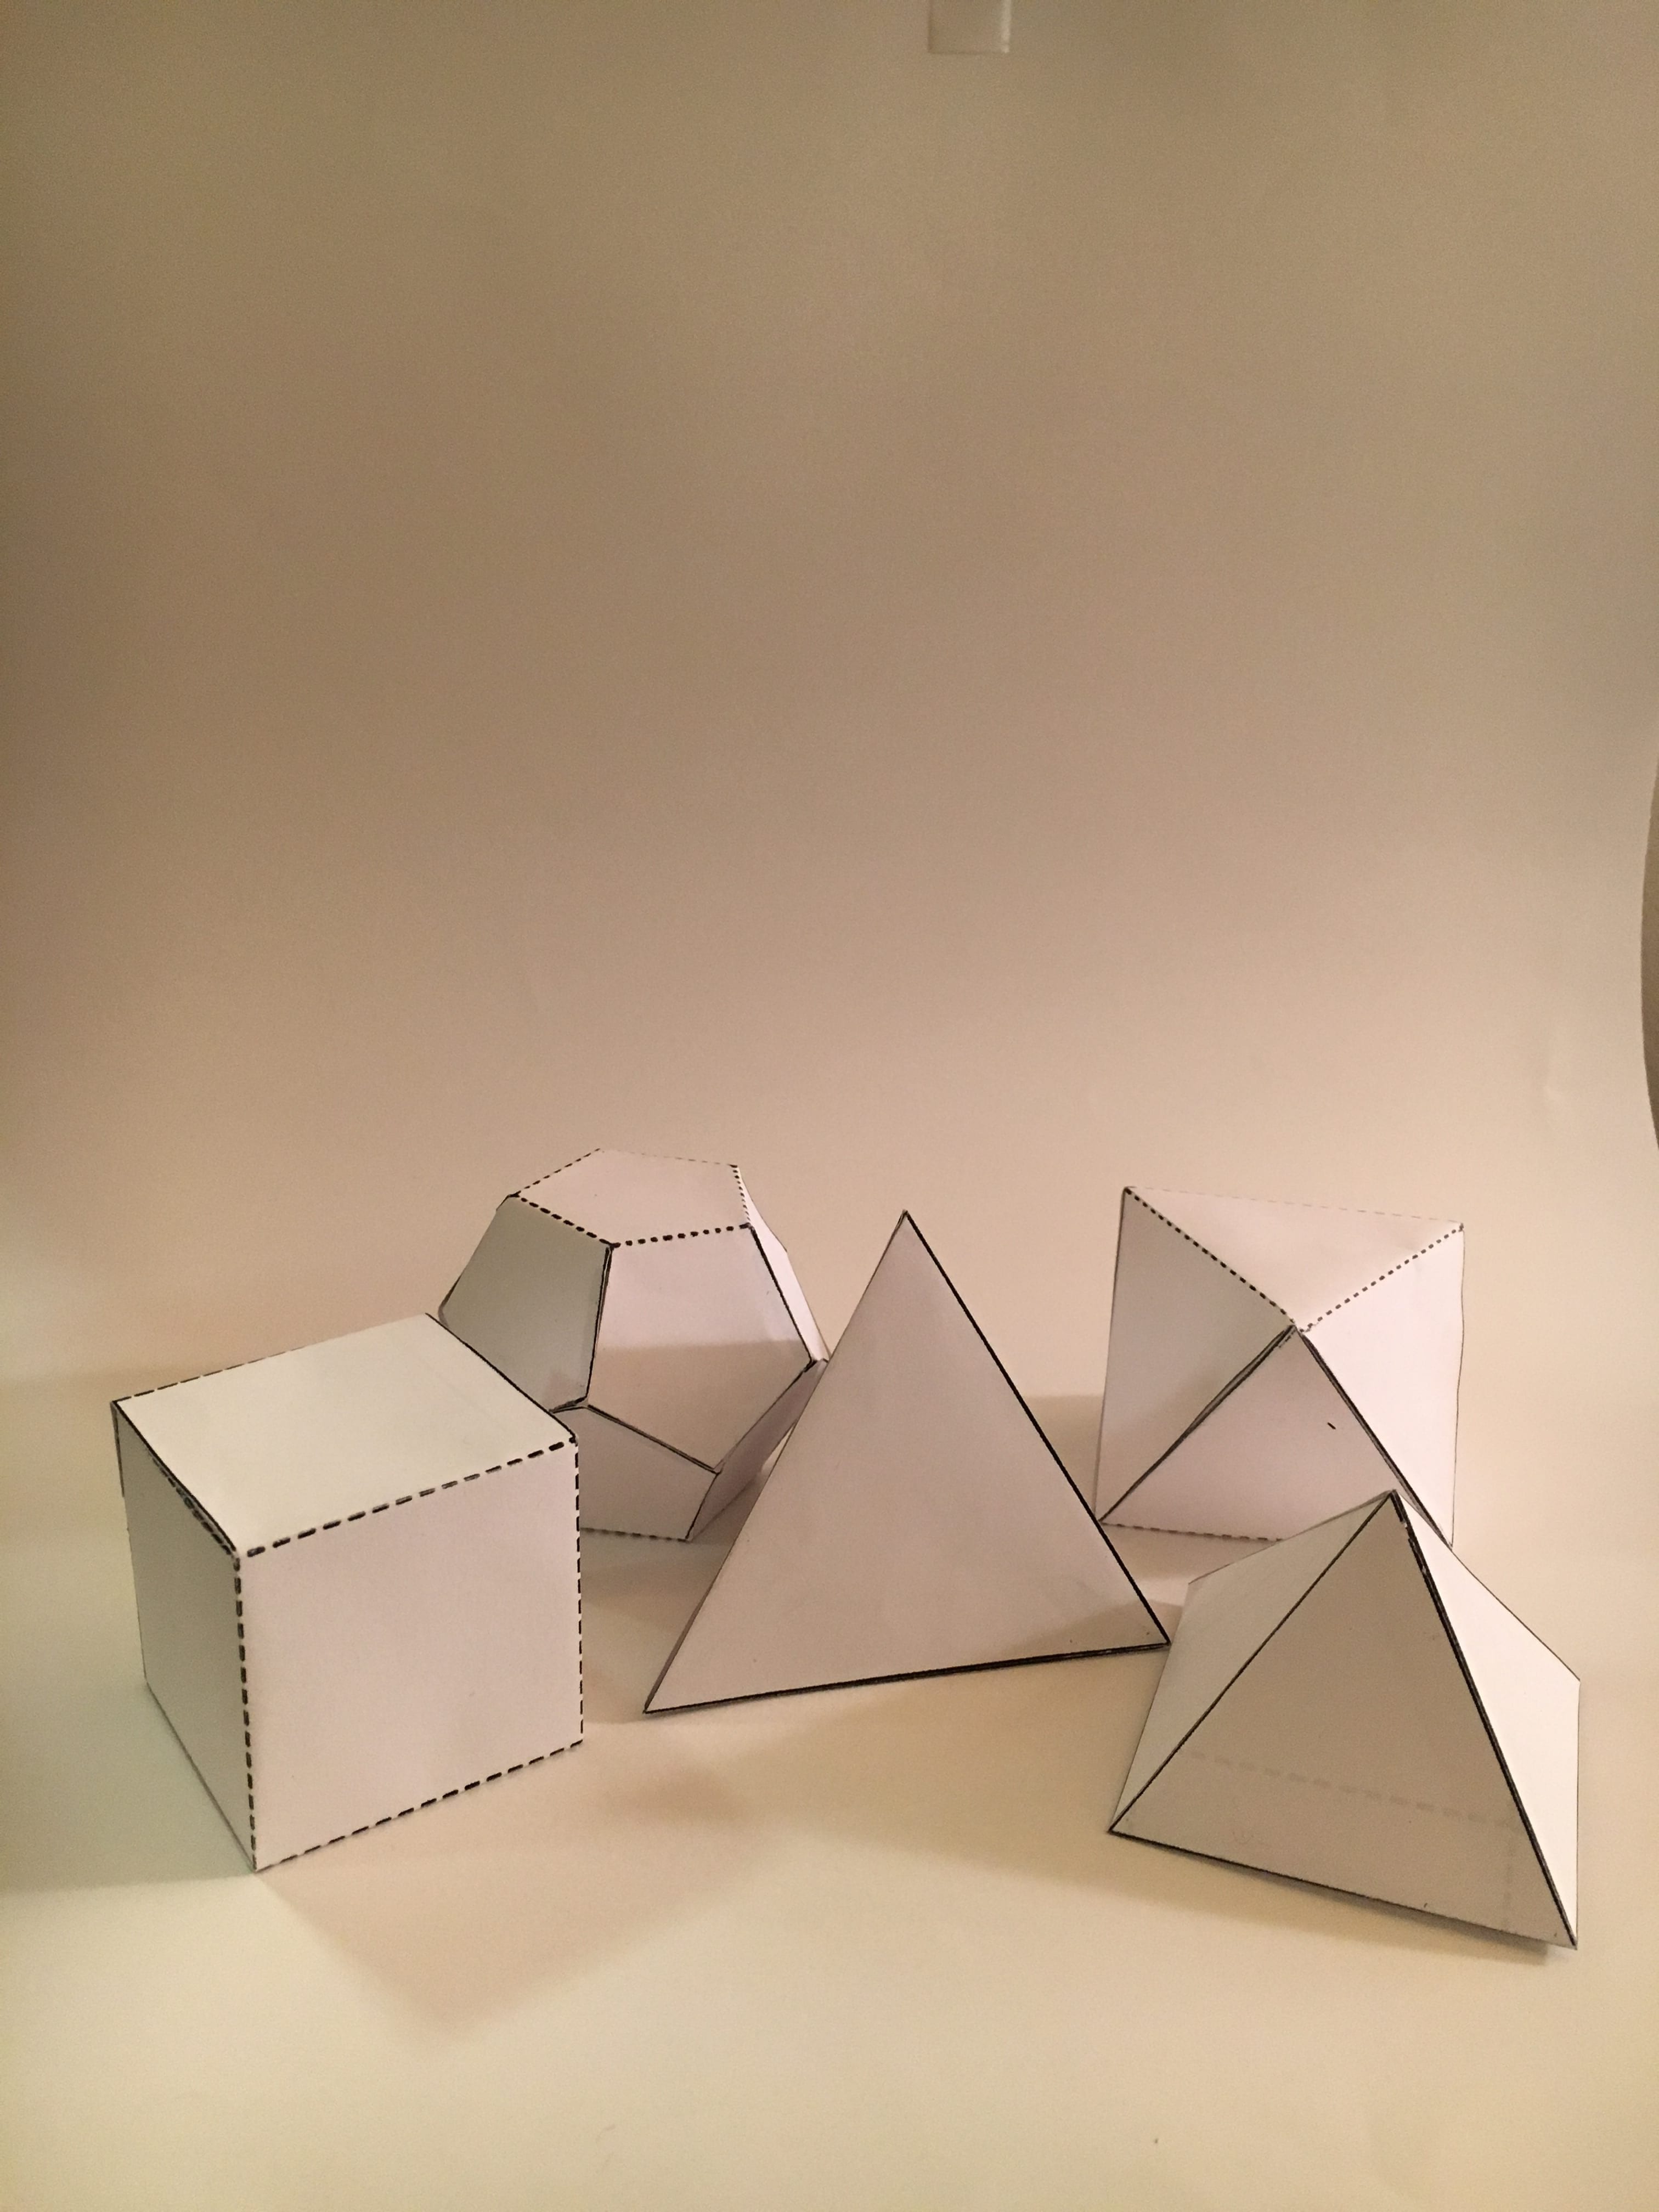 Assignment #5- 3D paper polyhedrons